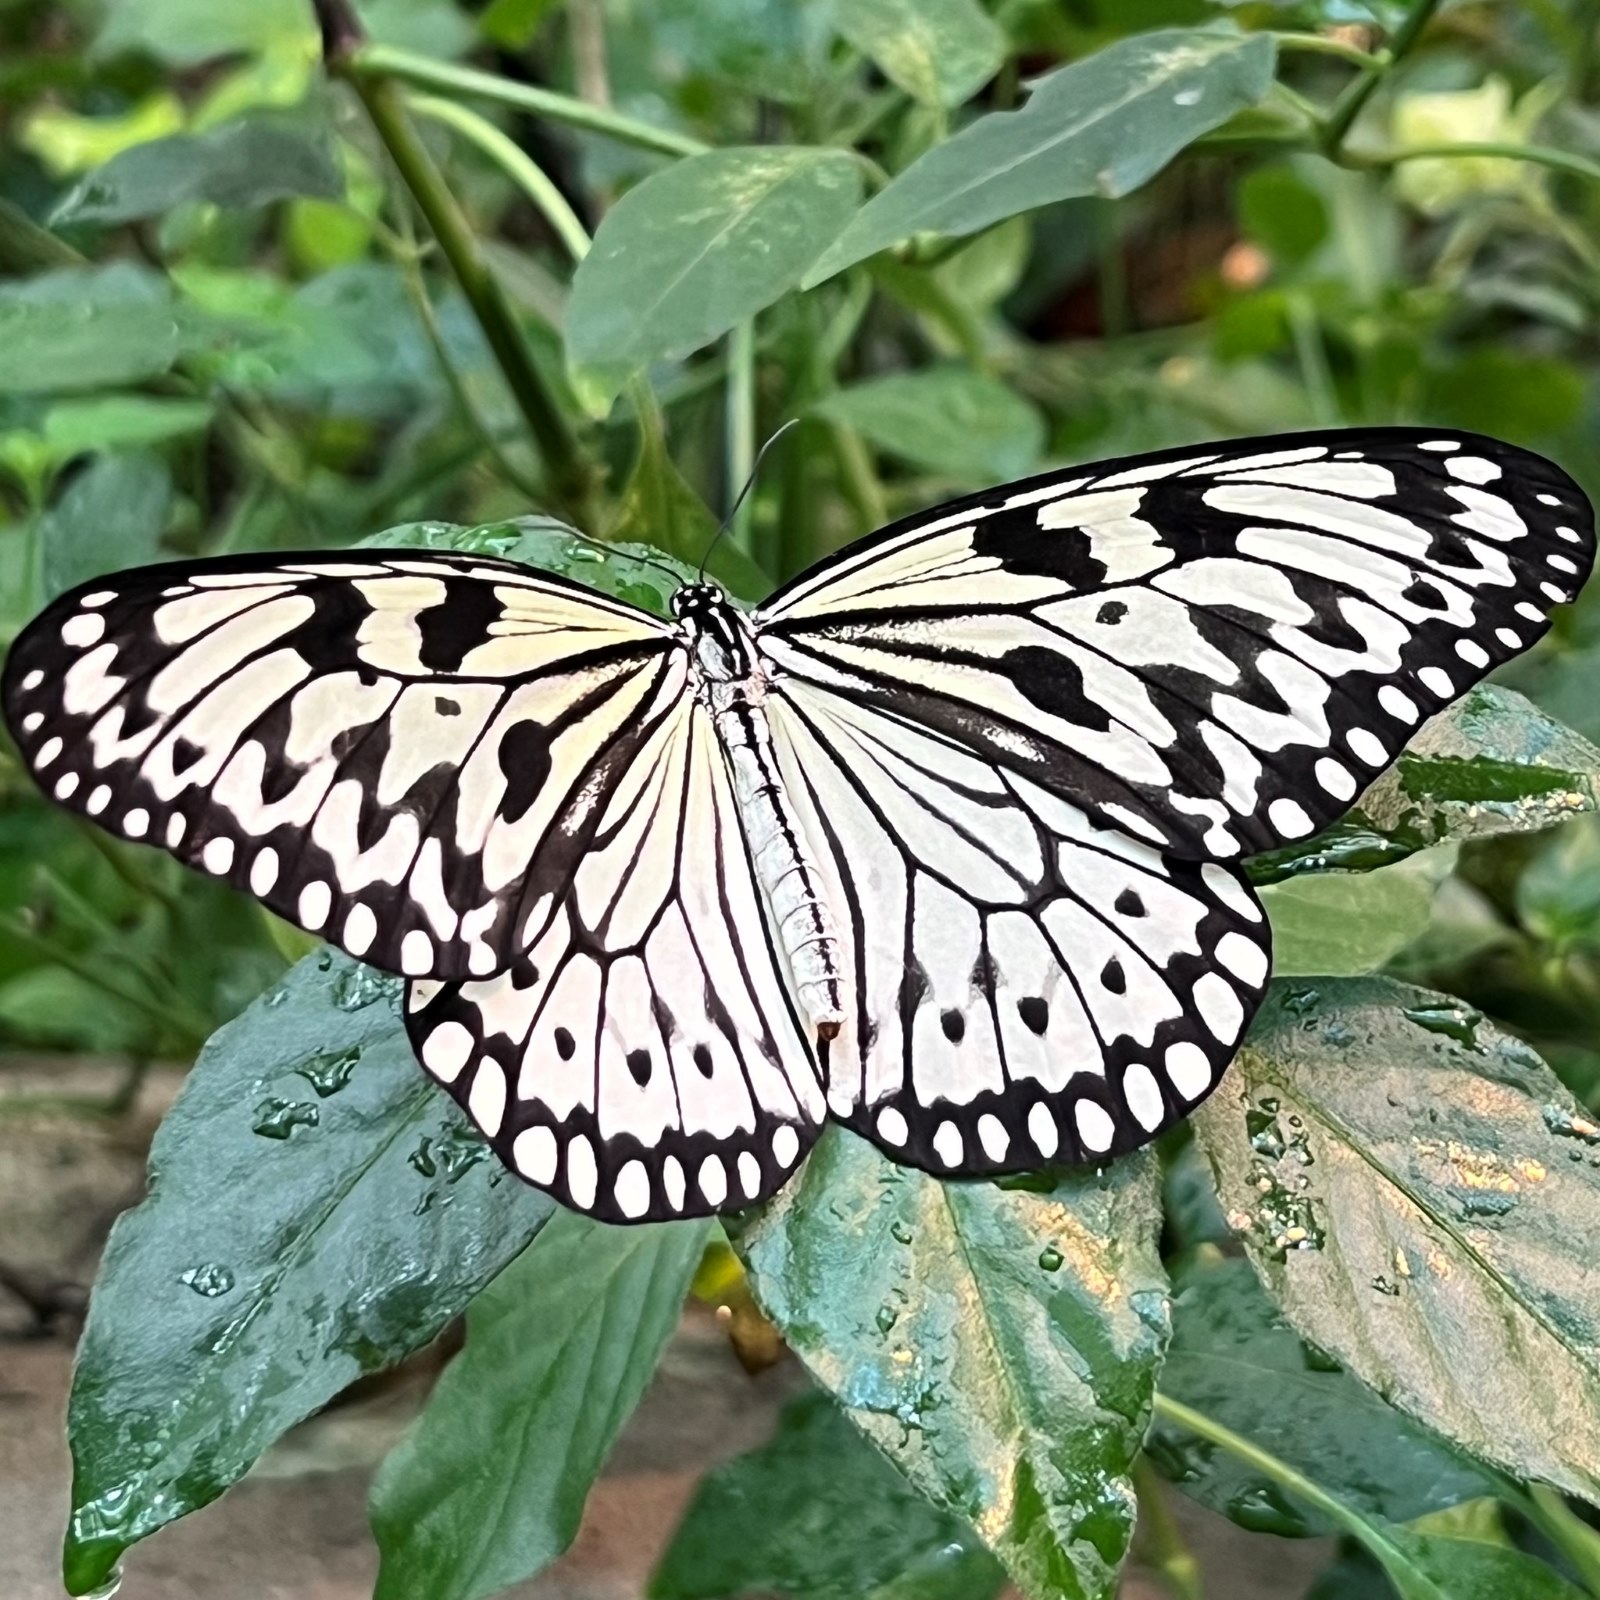 A black-and-white butterfly on a green leaf